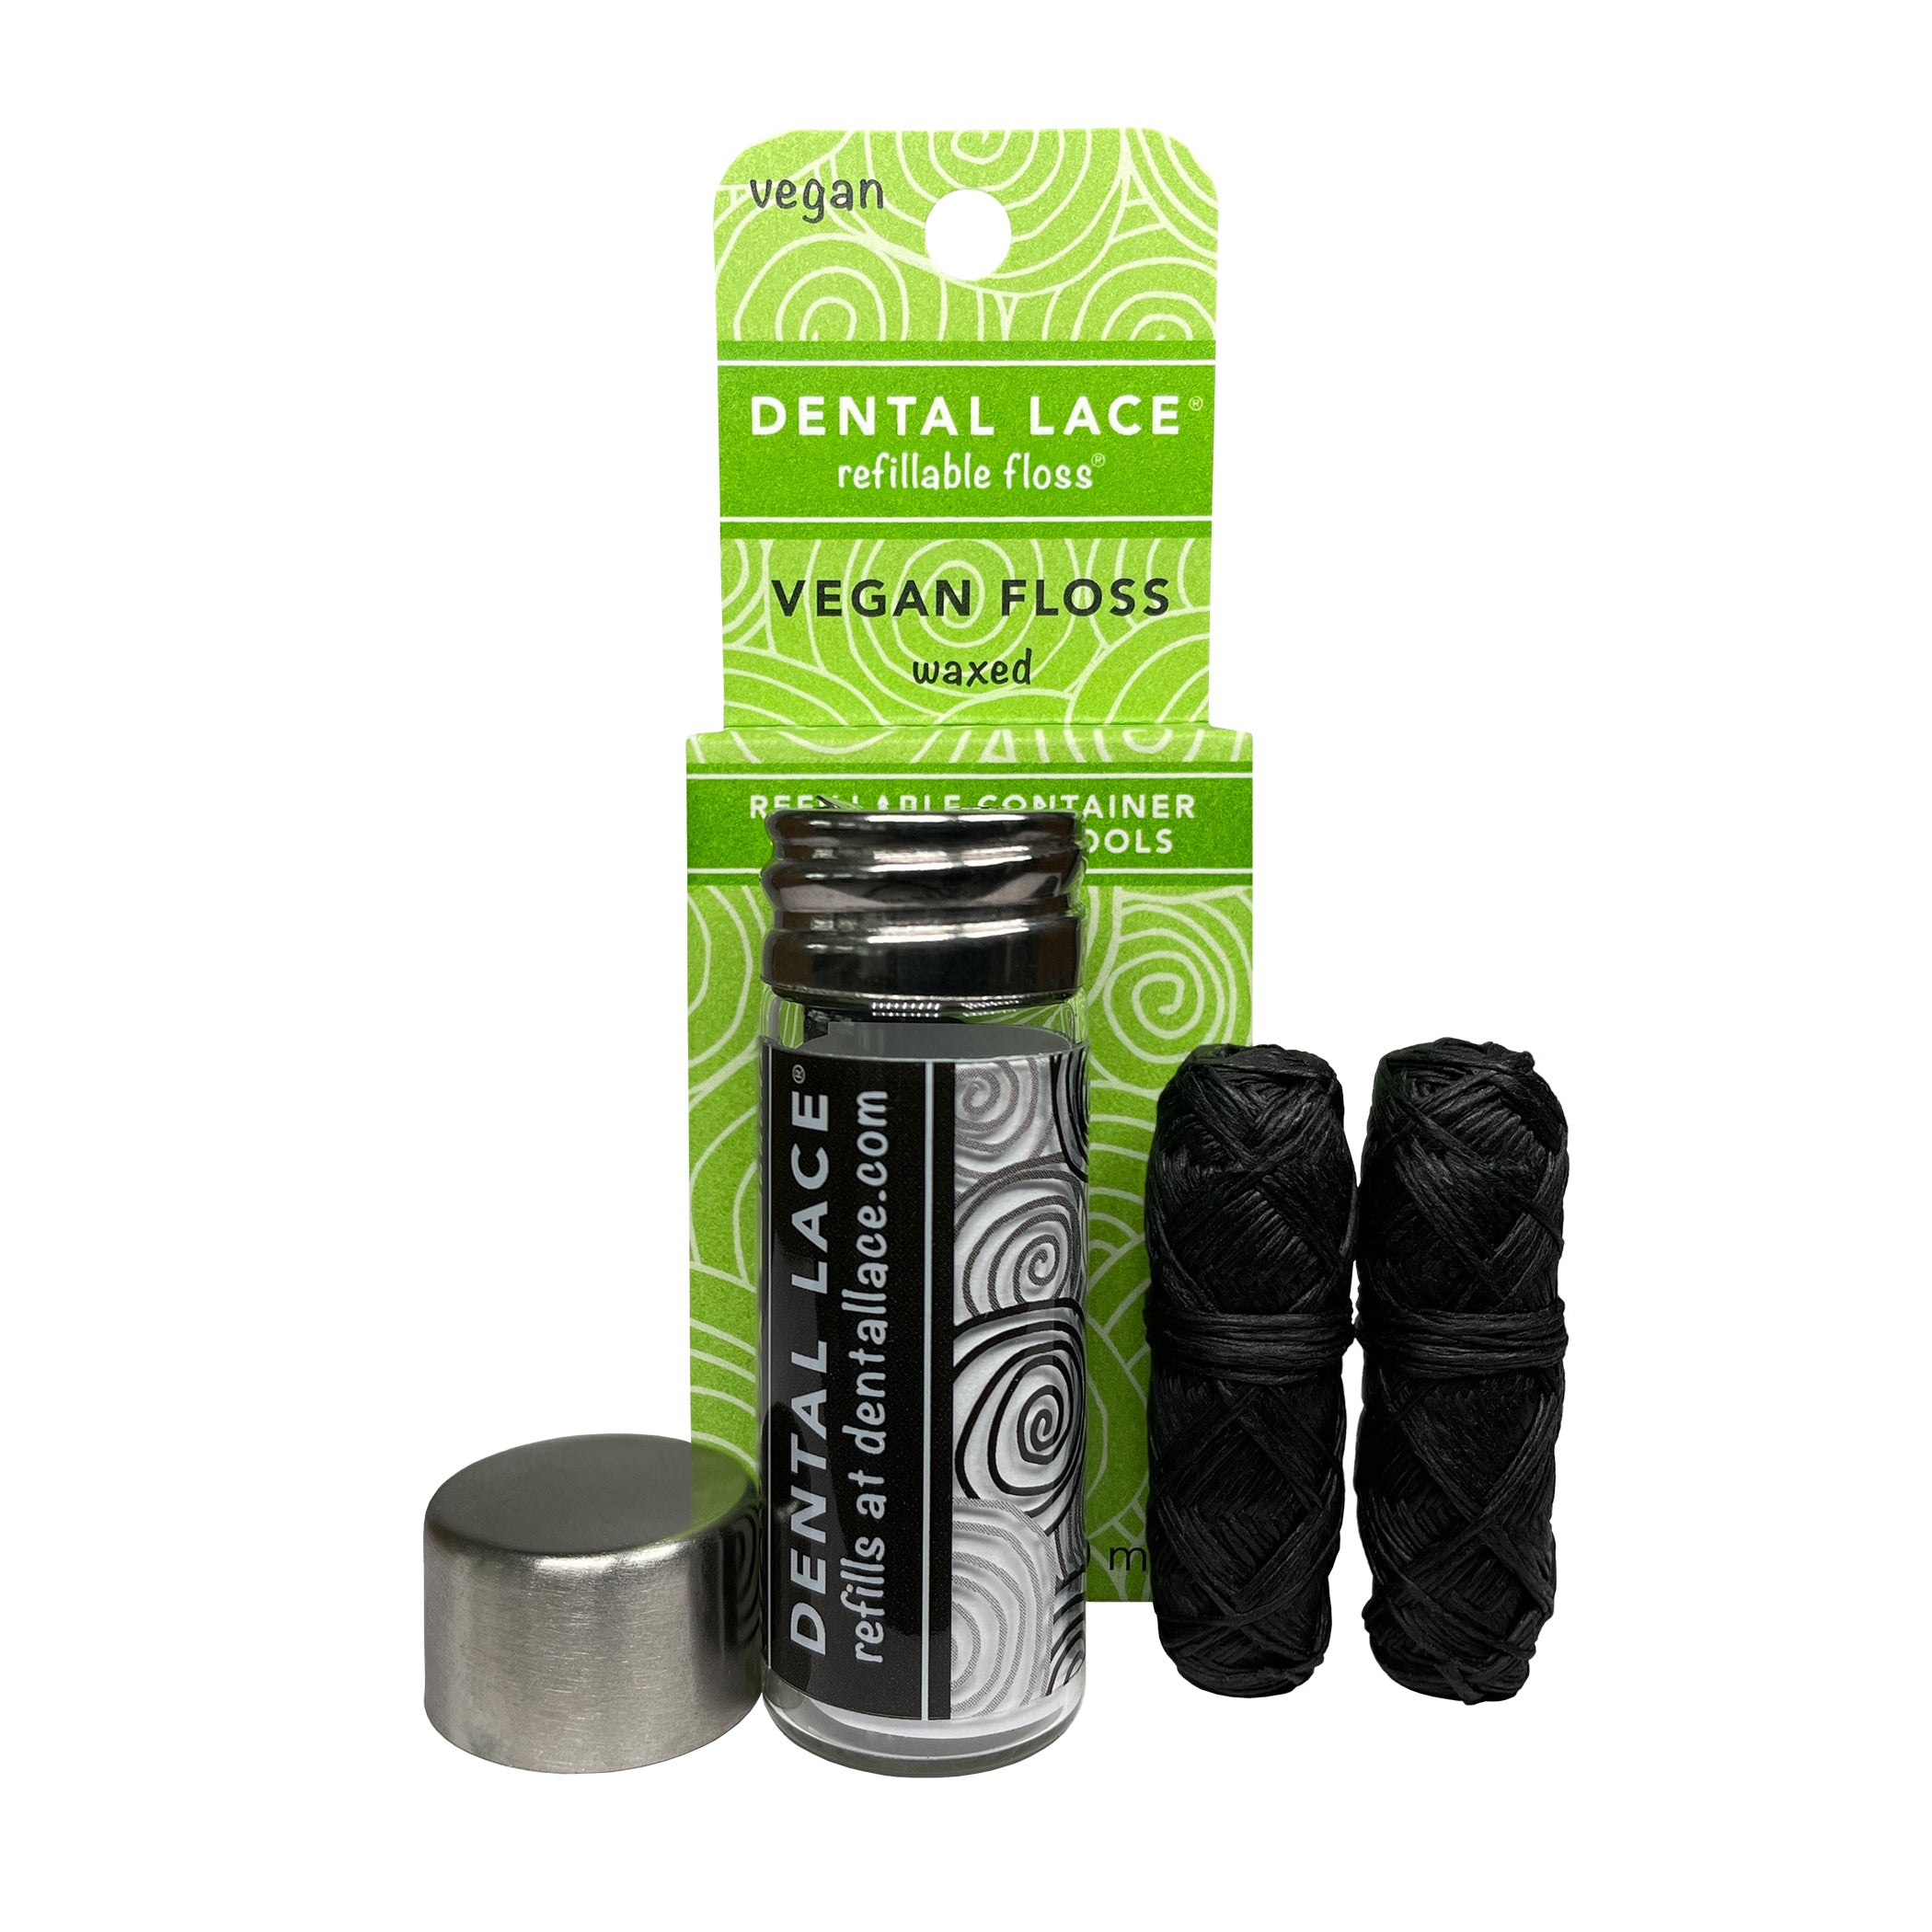 Dental Lace Vegan Bamboo Charcoal Infused Synthetic Floss Container with Refill